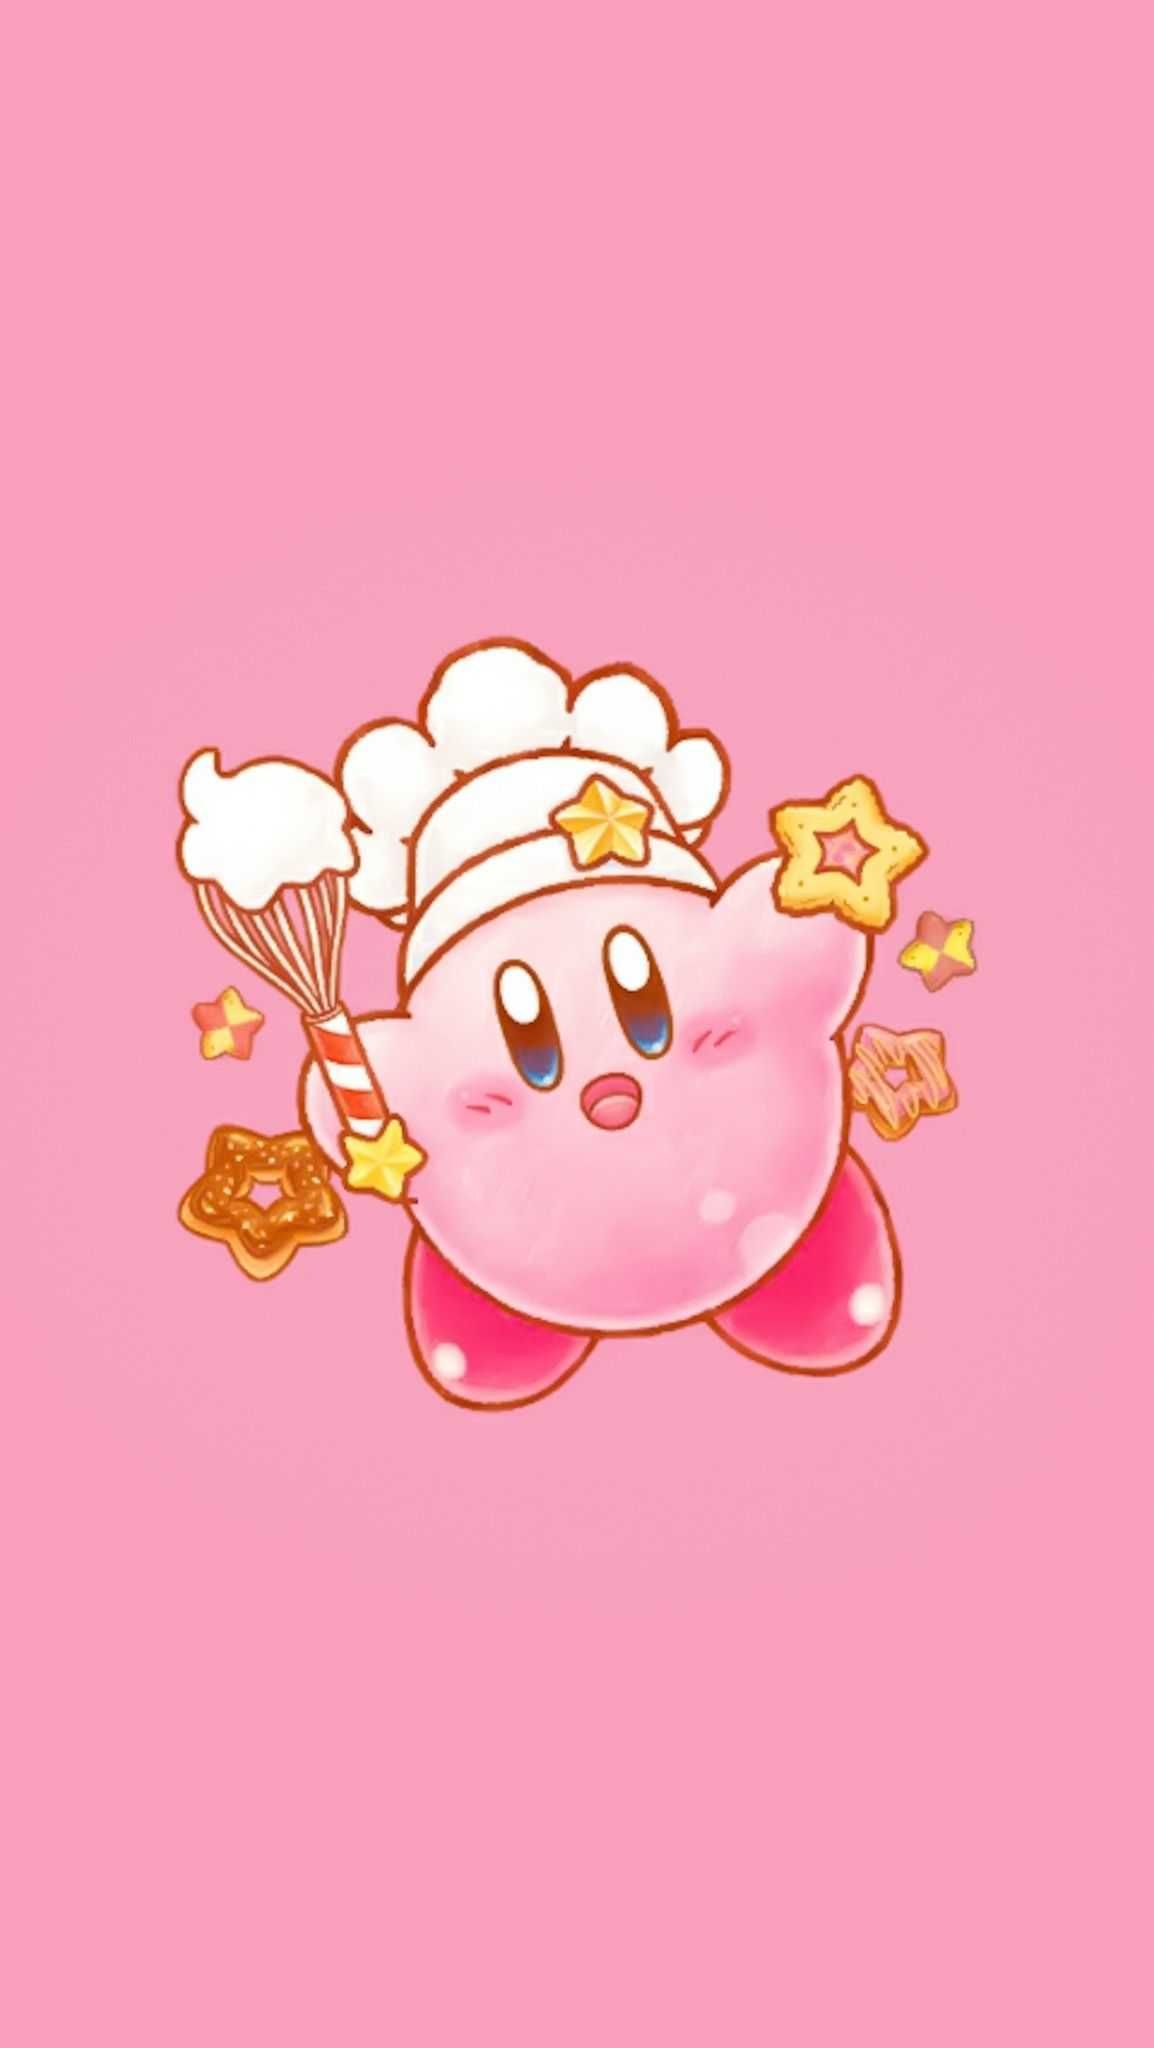 Cute Kirby Wallpaper Discover More Games, Kirby Wallpaper. 90844 Cute Kirby Wallpaper 4. Kirby, Kawaii Wallpaper, Easy Disney Drawings